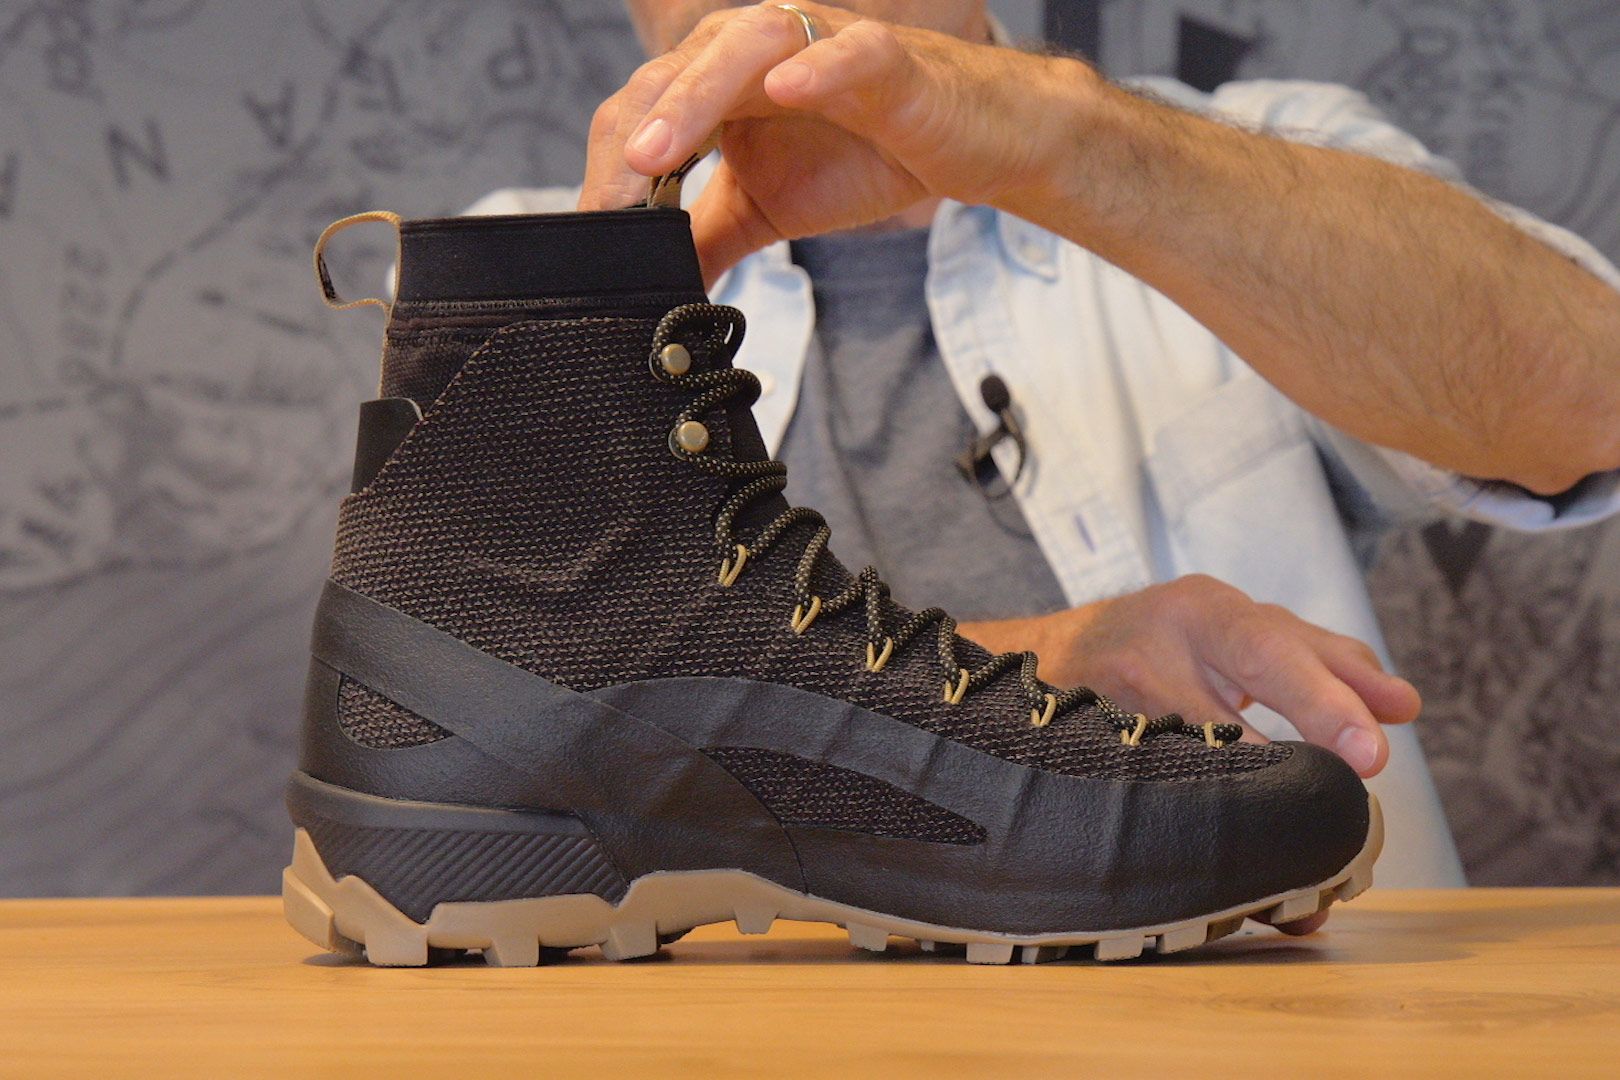 One of the Most Anticipated Hiking Boots Is Back in Stock